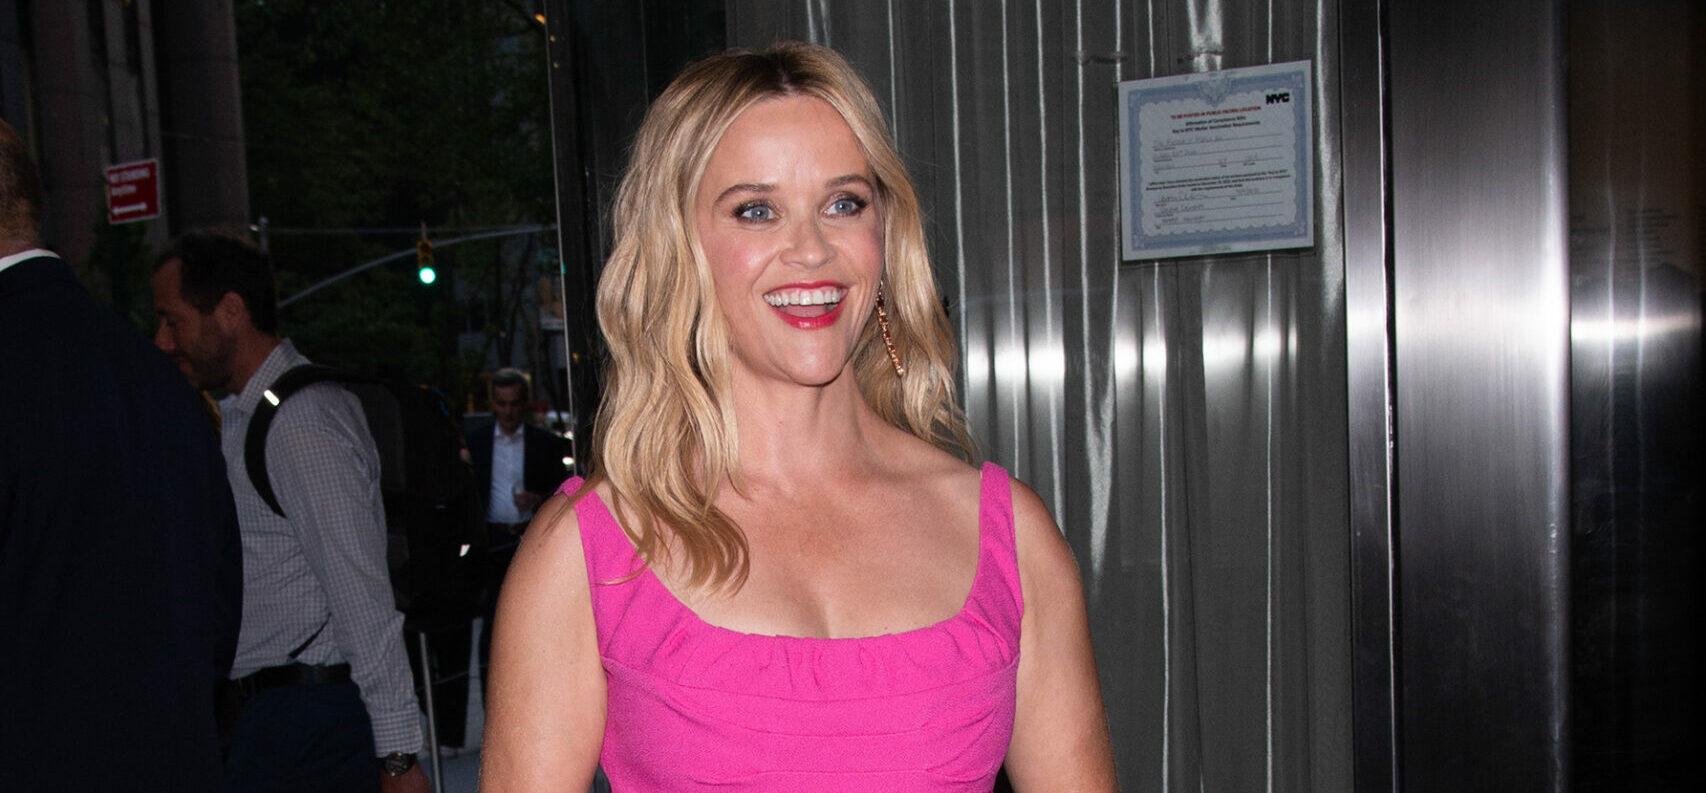 Reese Witherspoon, 